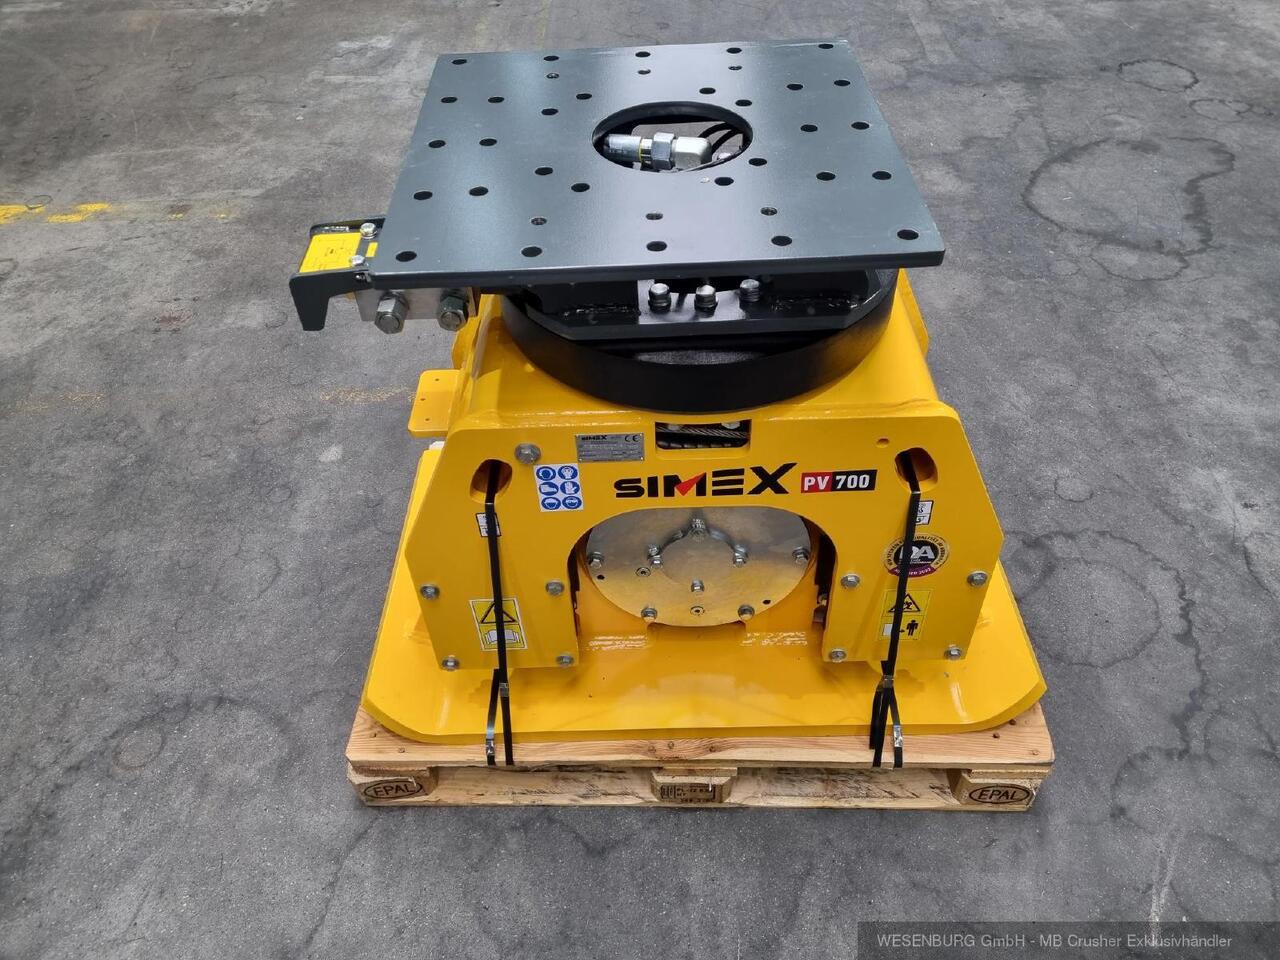 New Attachment, Plate compactor for Excavator Simex Anbauverdichter PV700 inkl. Drehwerk Anbauklasse 12 - 25 t: picture 7